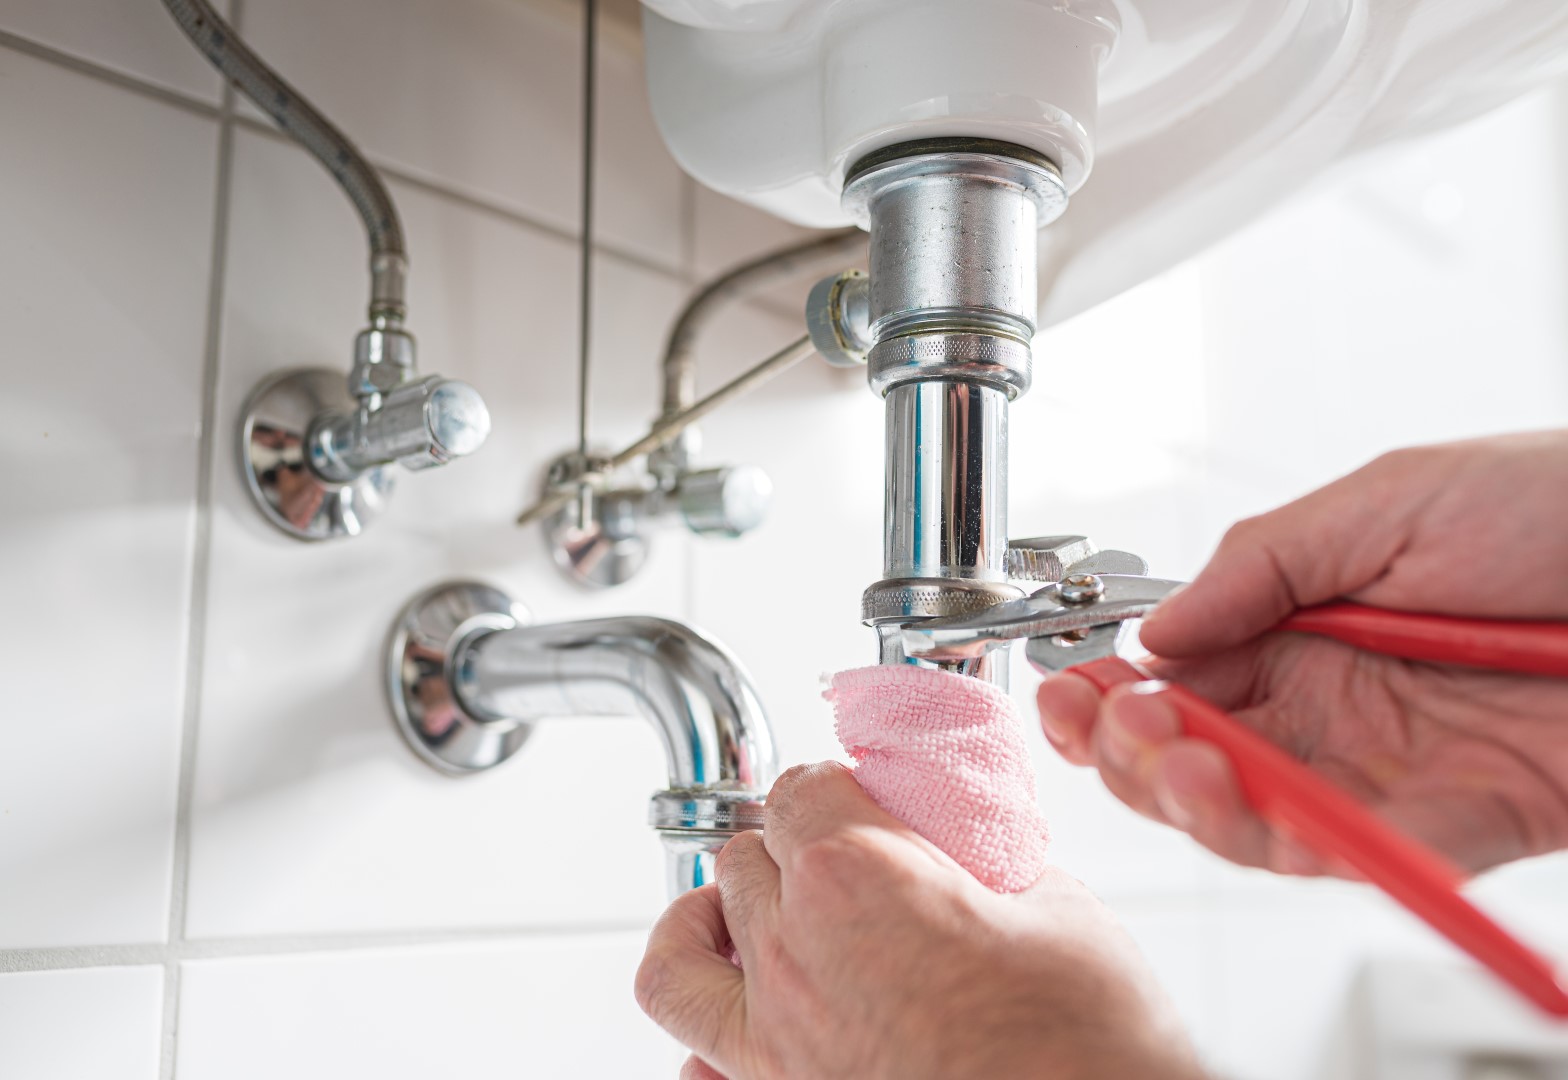 Prompt Plumbing Services in Bristol Quick Solutions for Your Plumbing